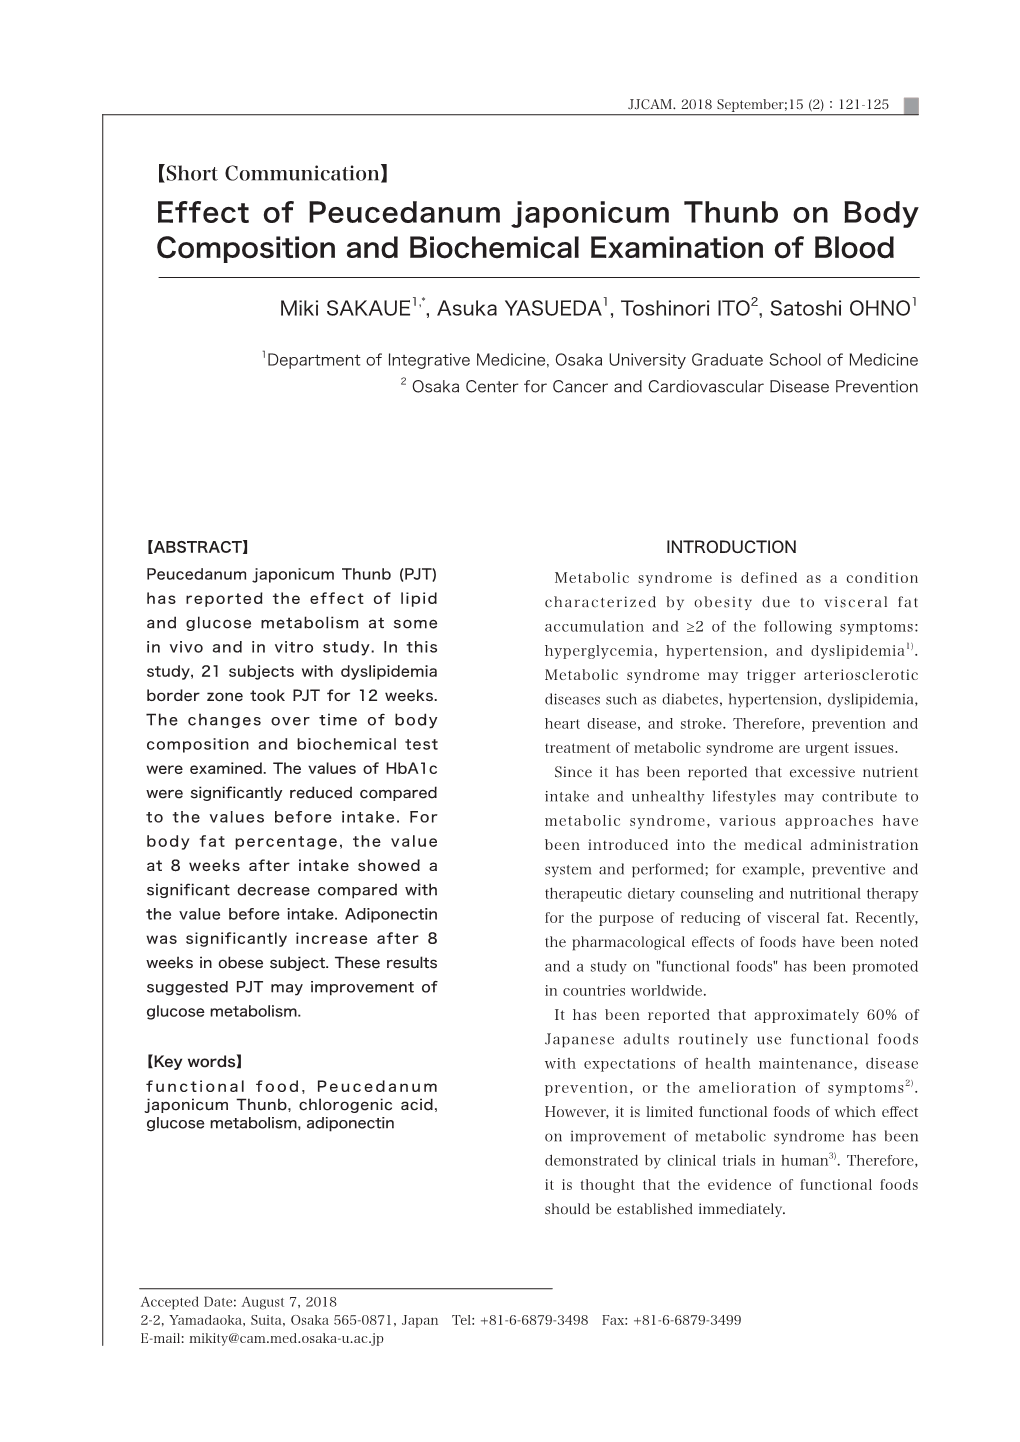 Effect of Peucedanum Japonicum Thunb on Body Composition and Biochemical Examination of Blood